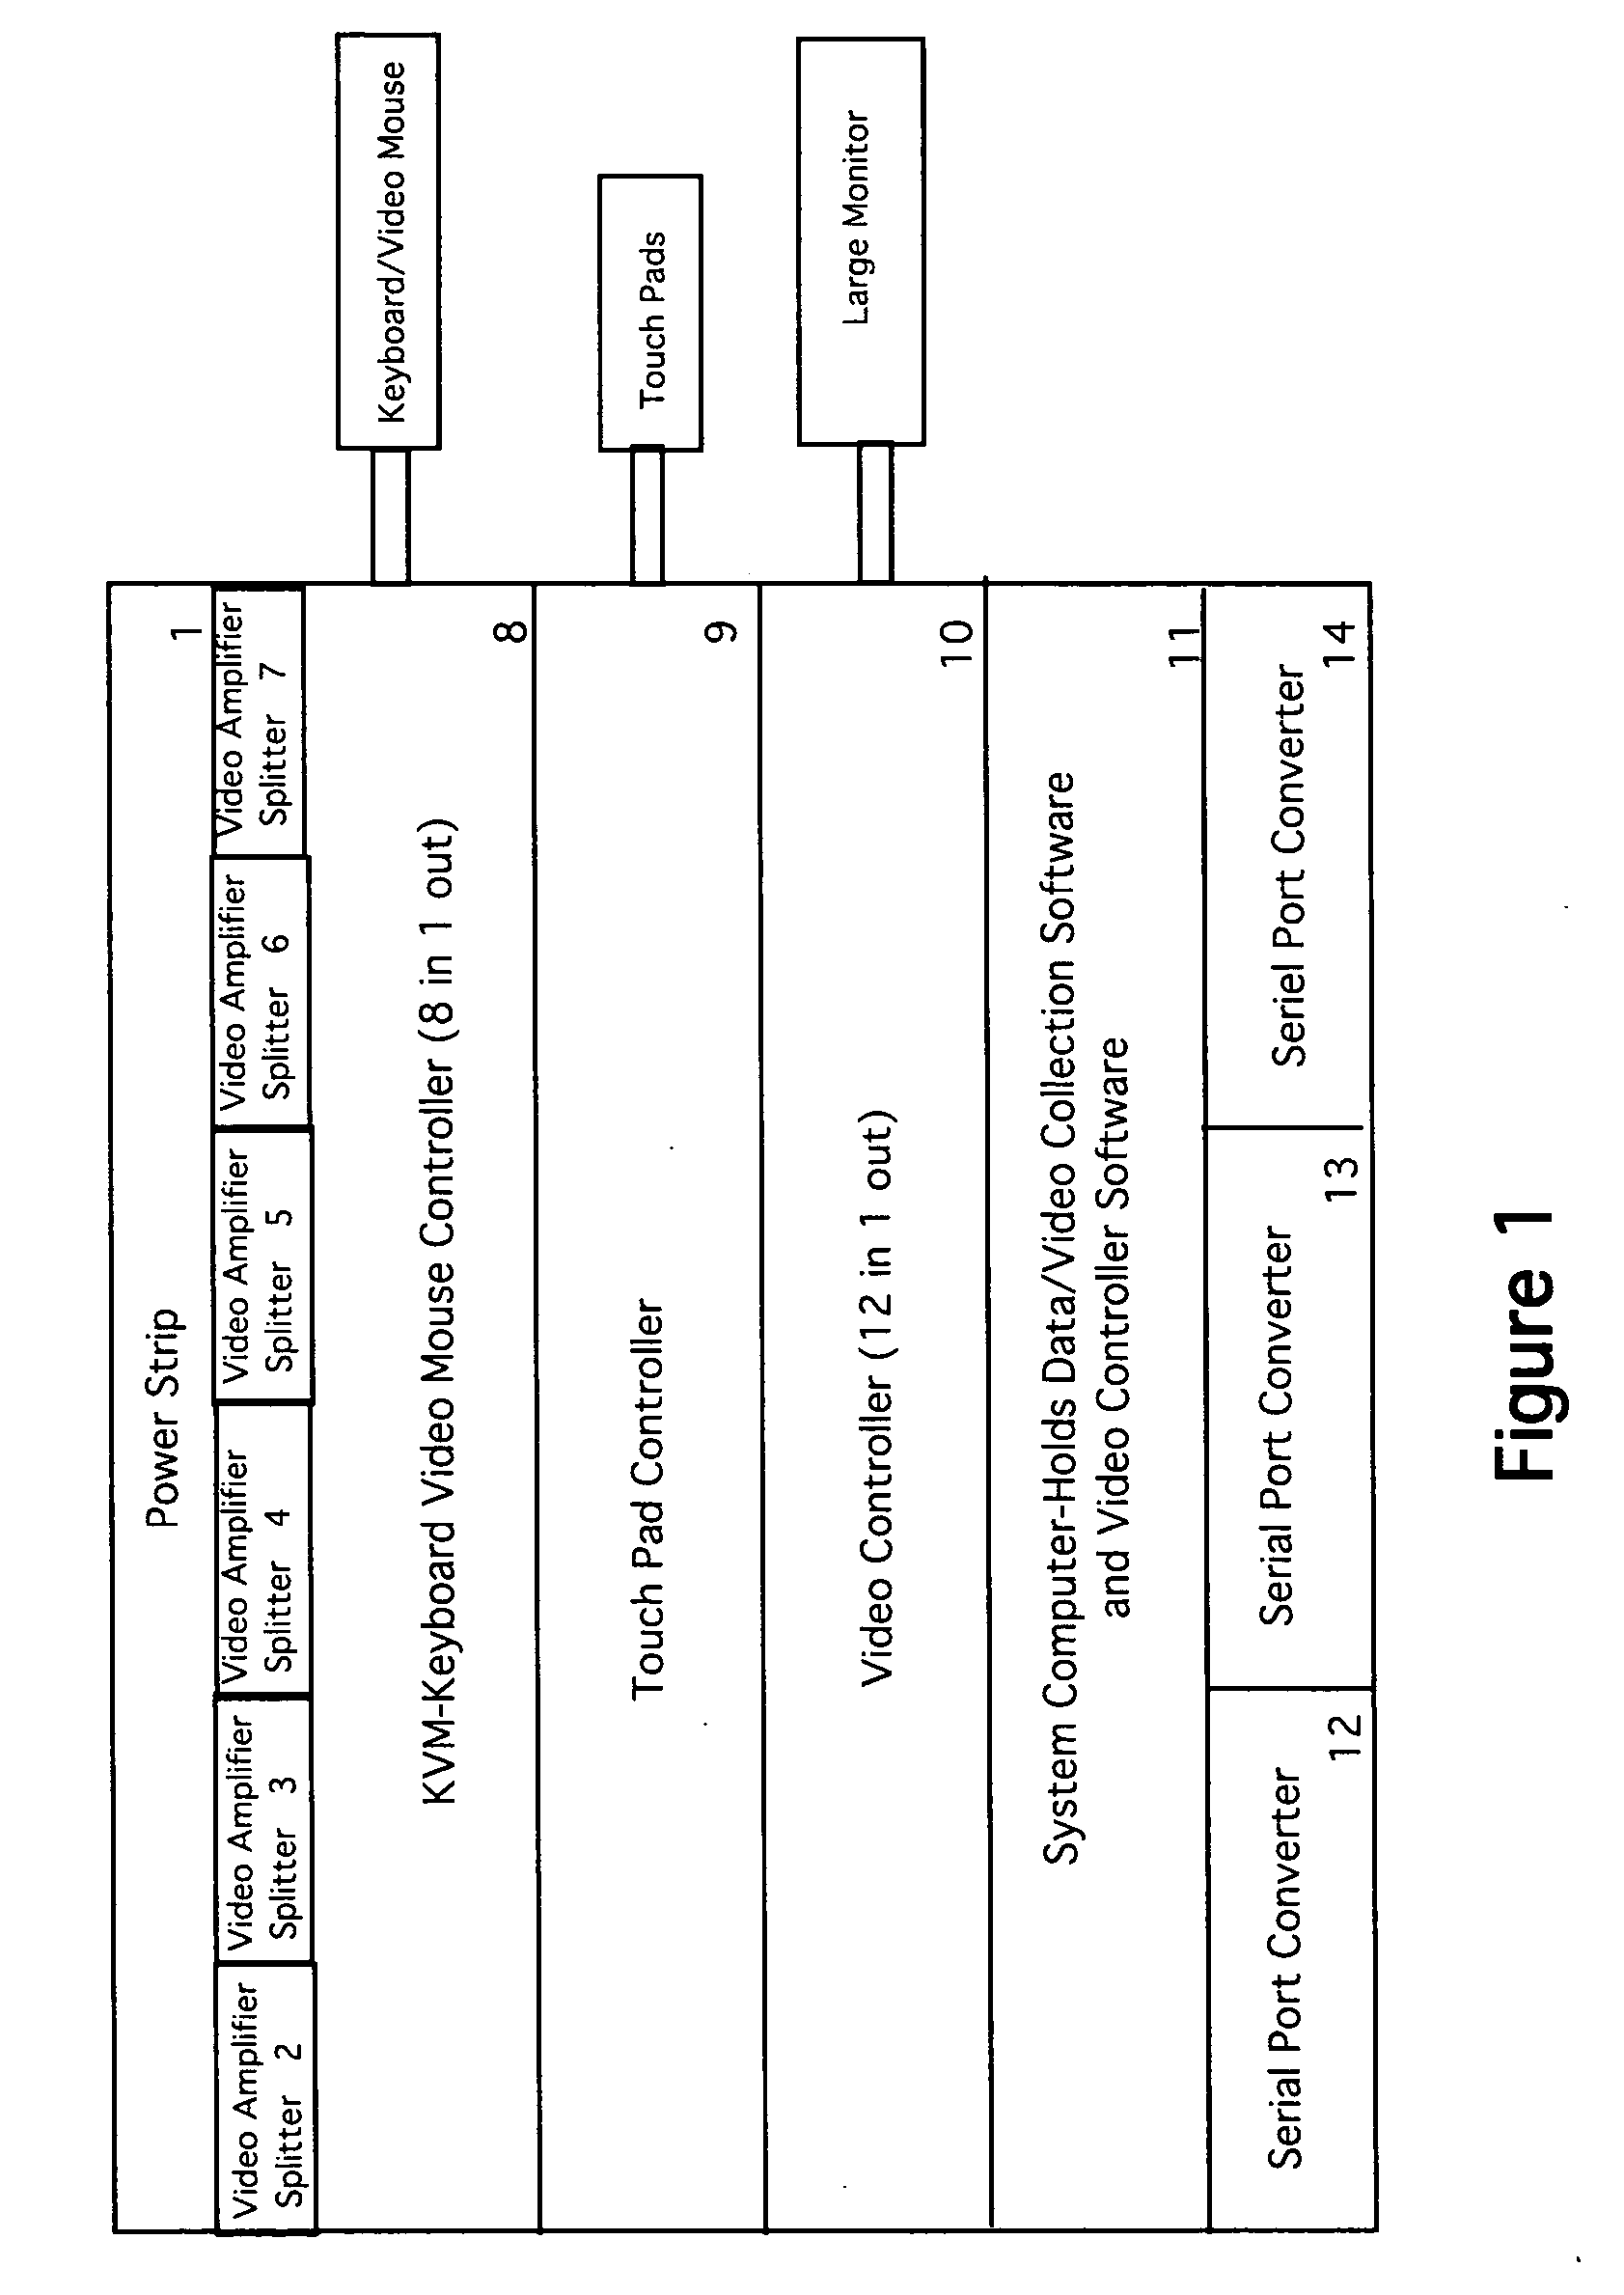 Multiple-input selectable systems integrated display and control functions unit for electrophysiology and the like